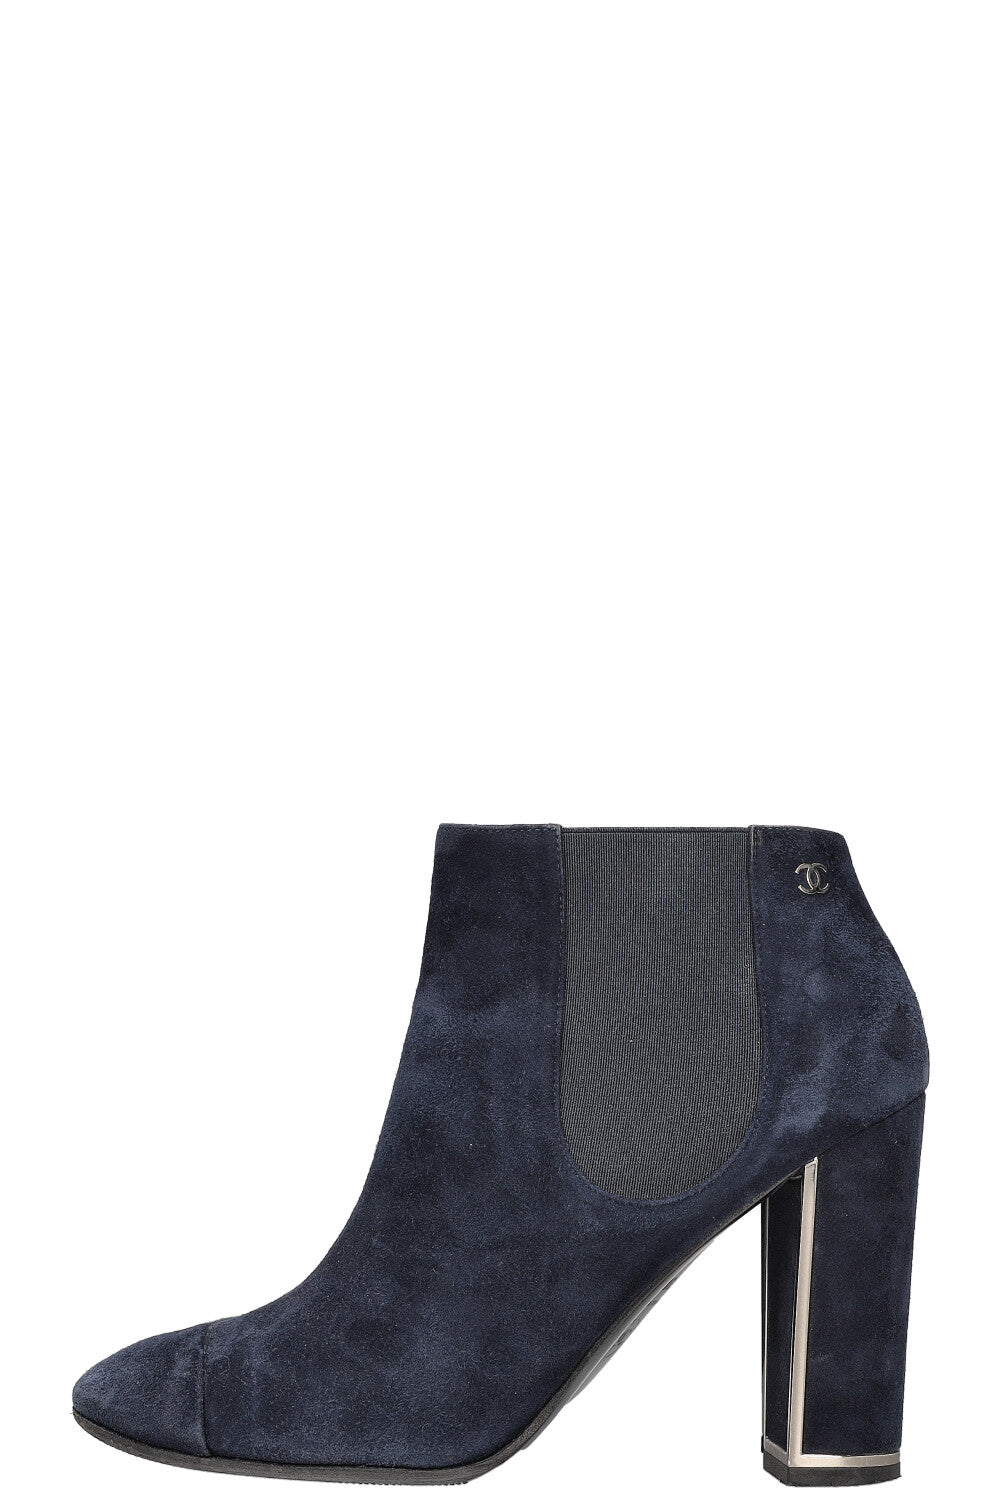 CHANEL Chelsea Boots Suede Navy